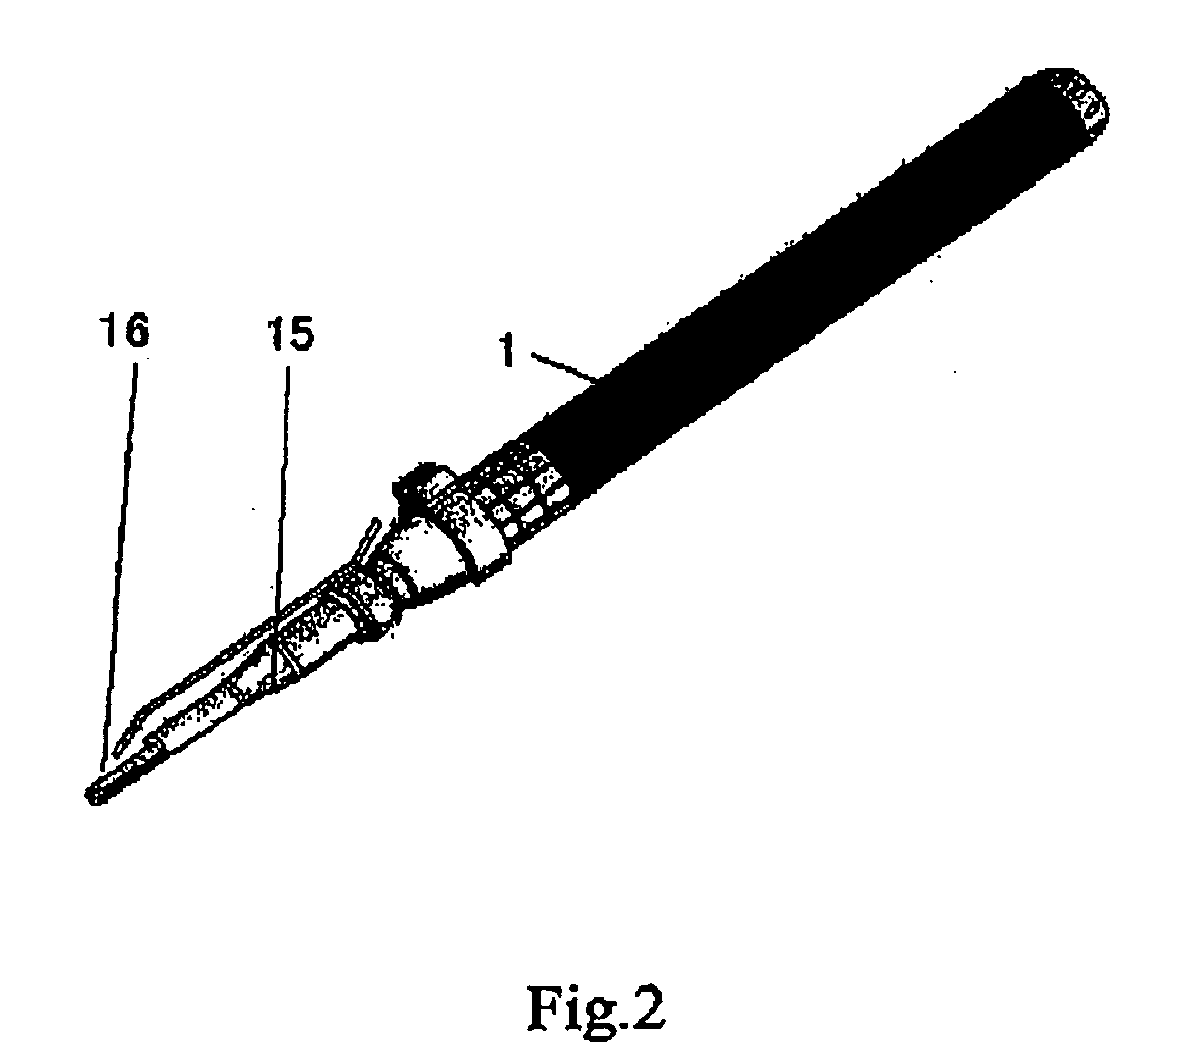 Ultrasonic orthopedic surgical device with compound ultrasound vibration